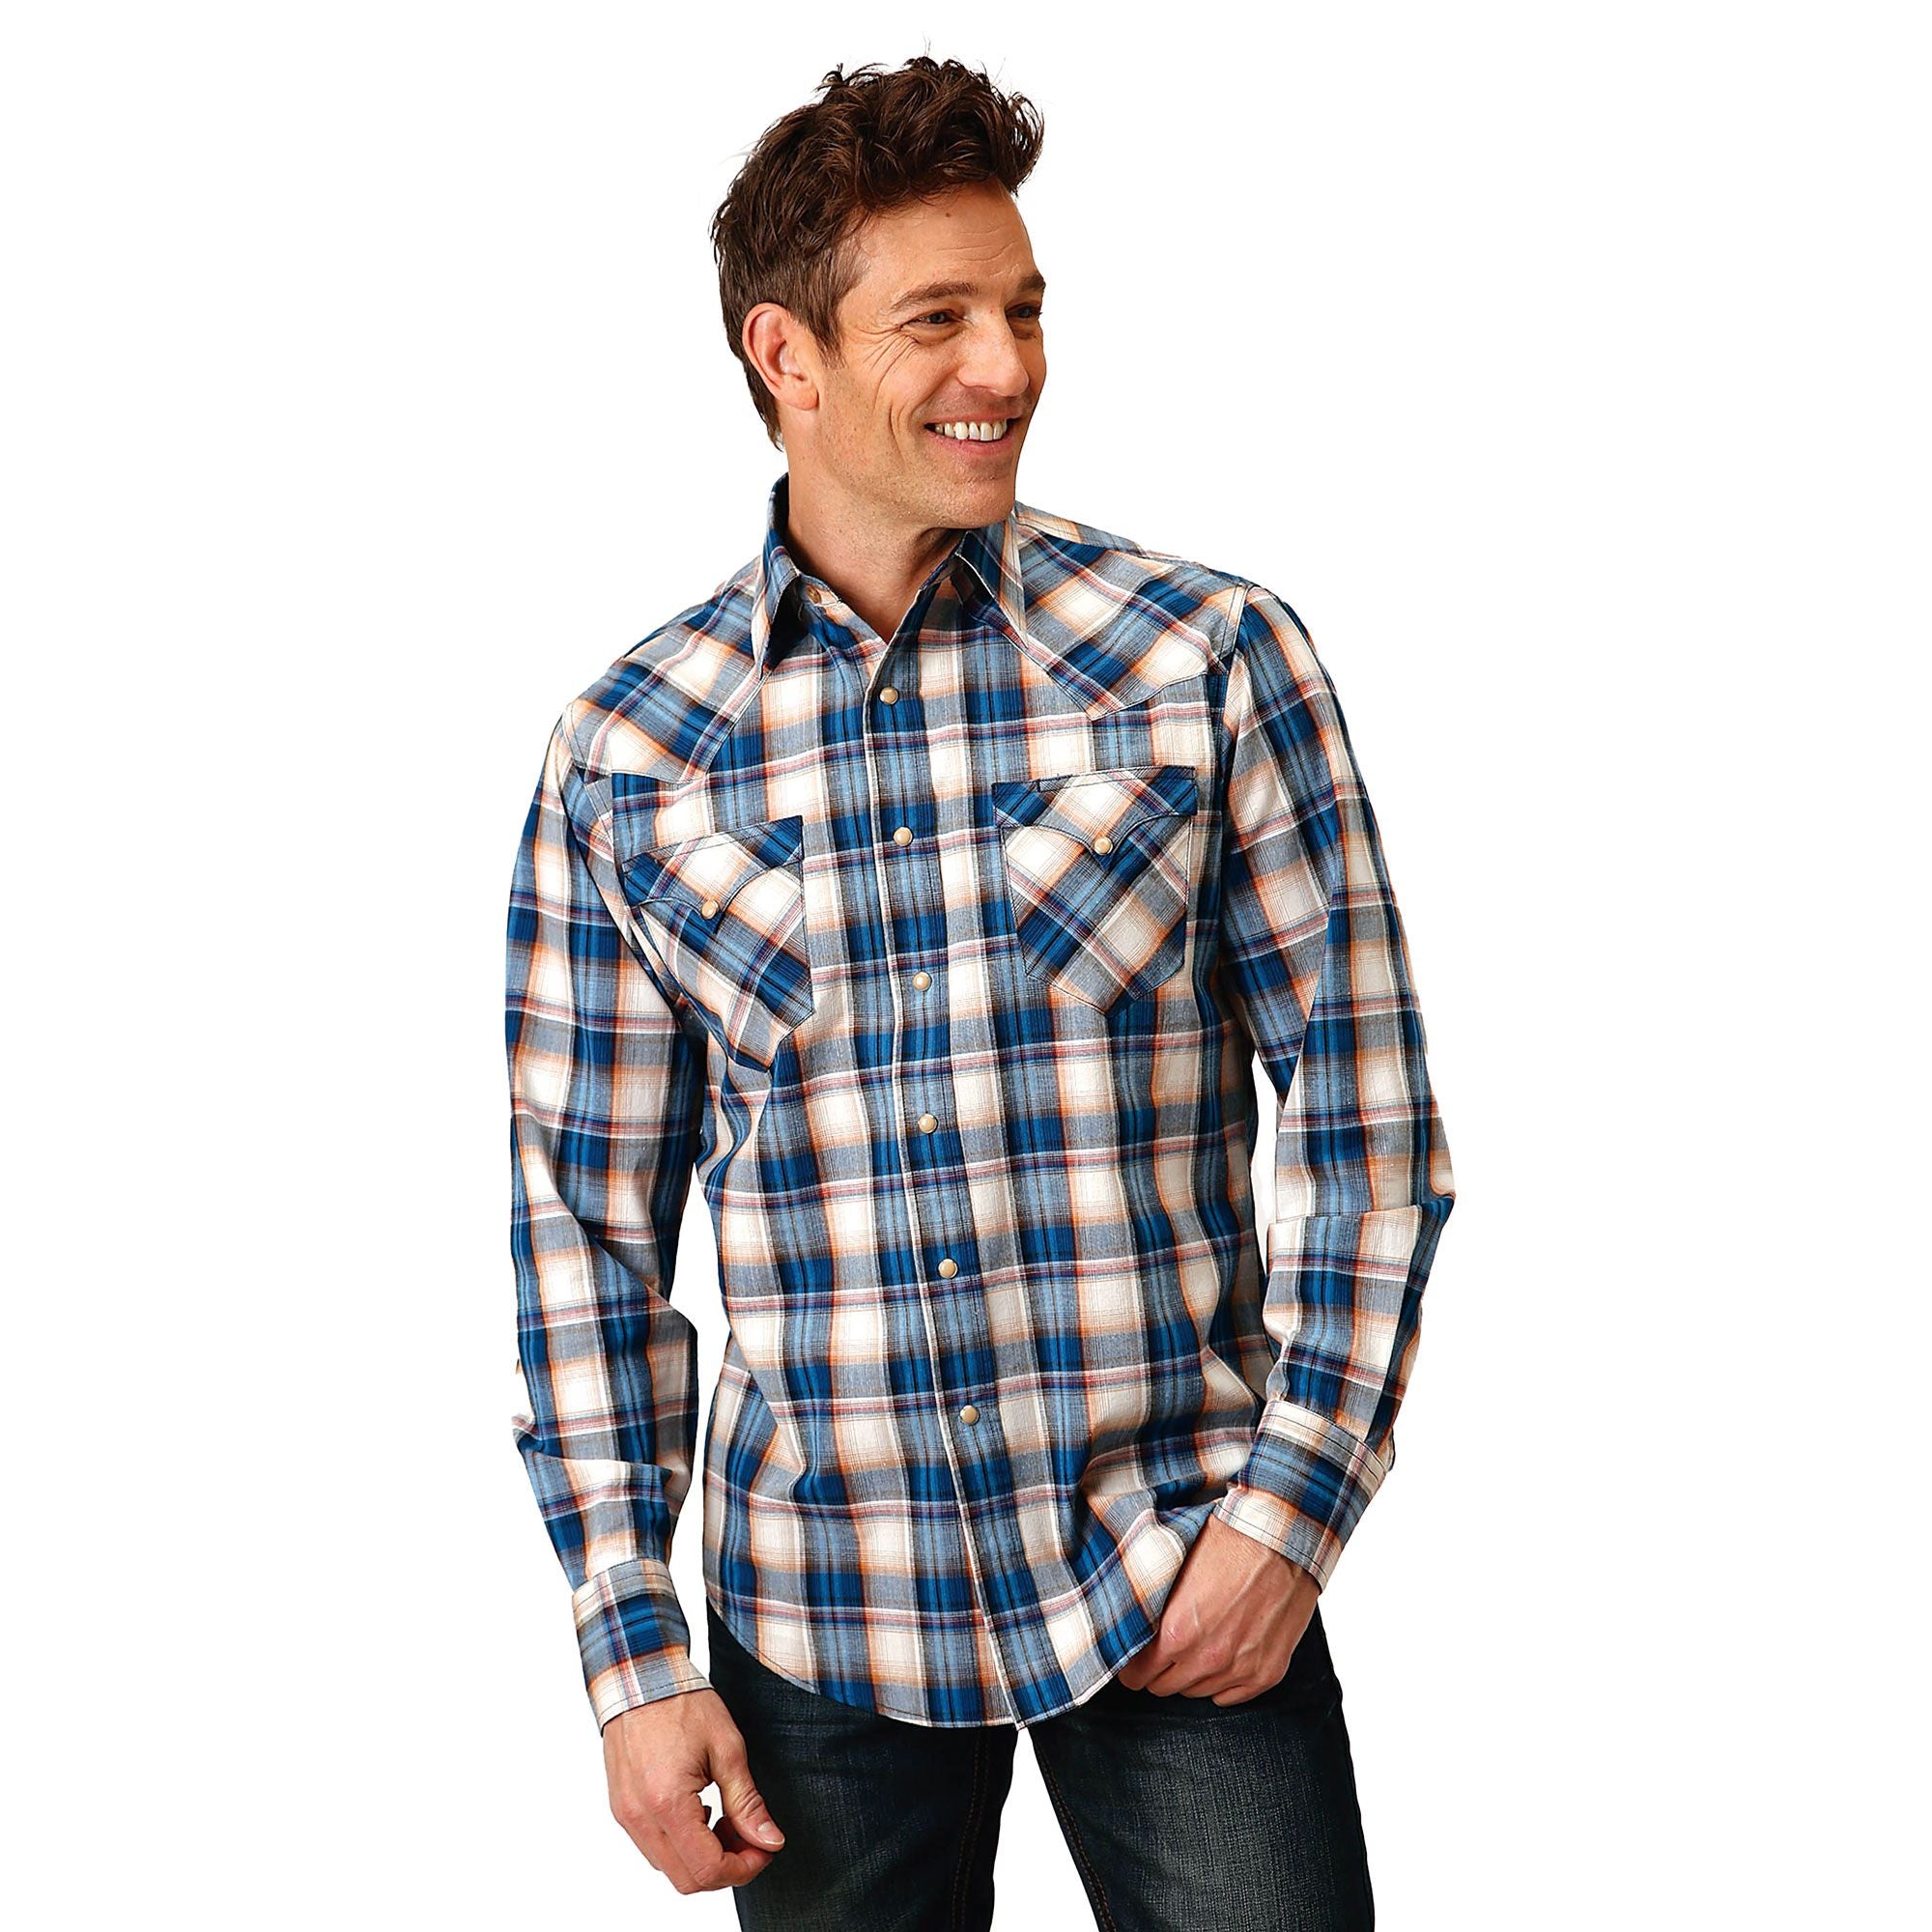 Roper Mns West Made Collection LS Shirt Plaid Blue - Summer Clearance